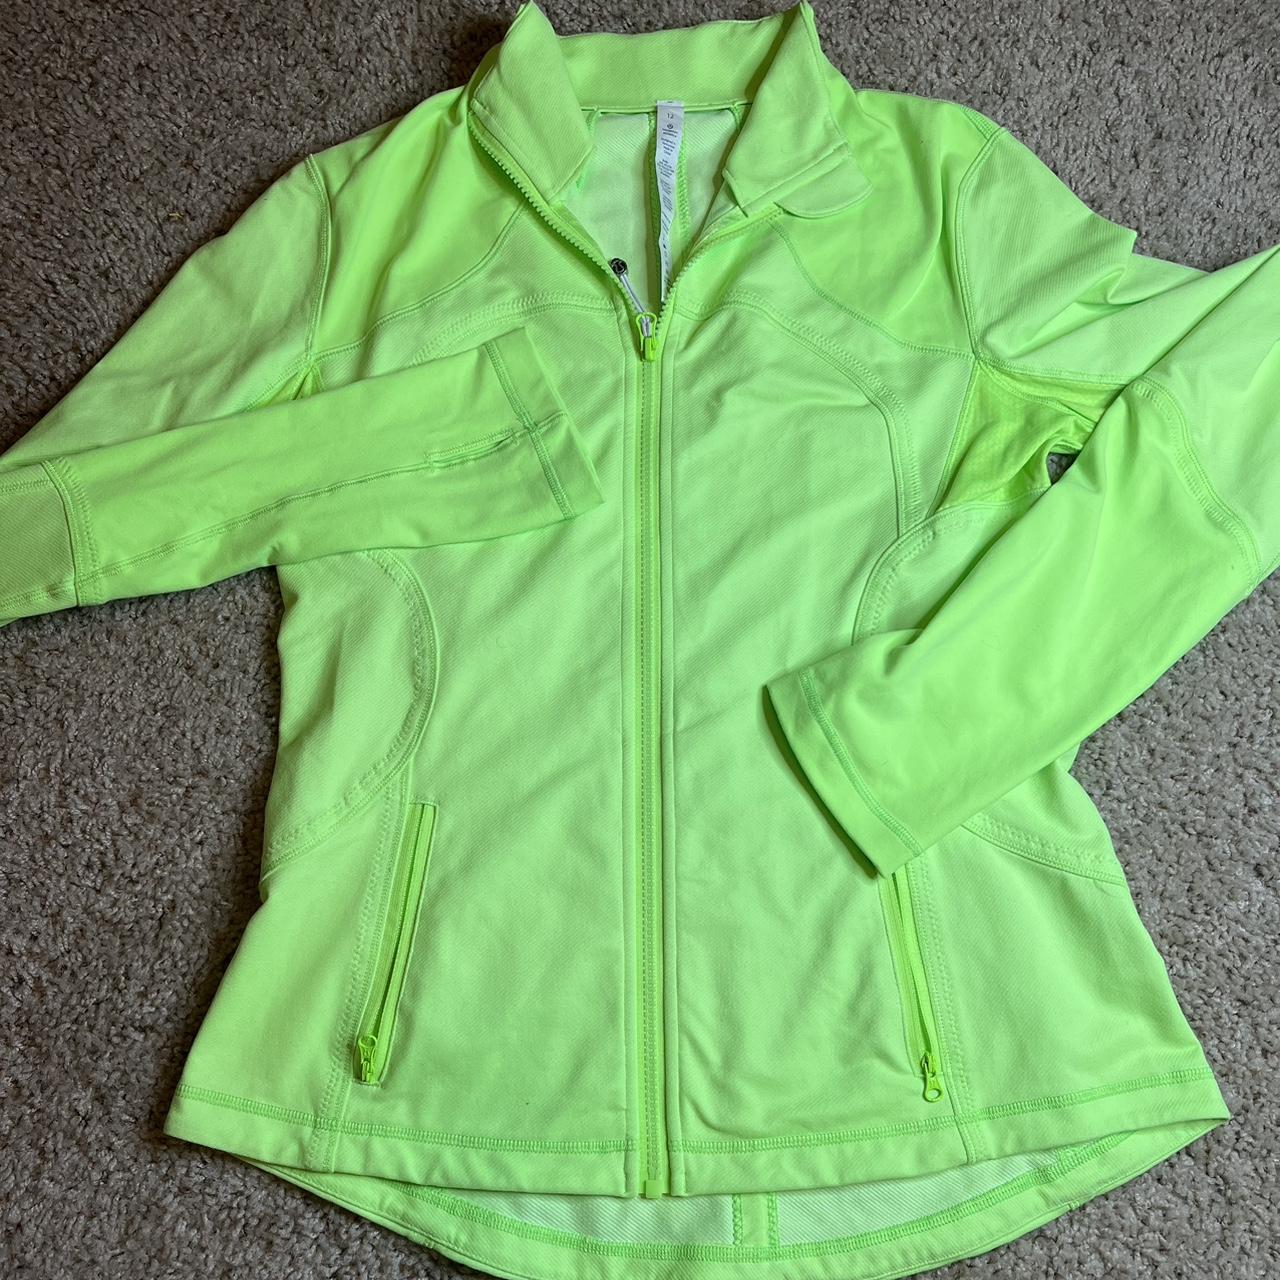 Lululemon Define Jacket Brand New with out tags but... - Depop